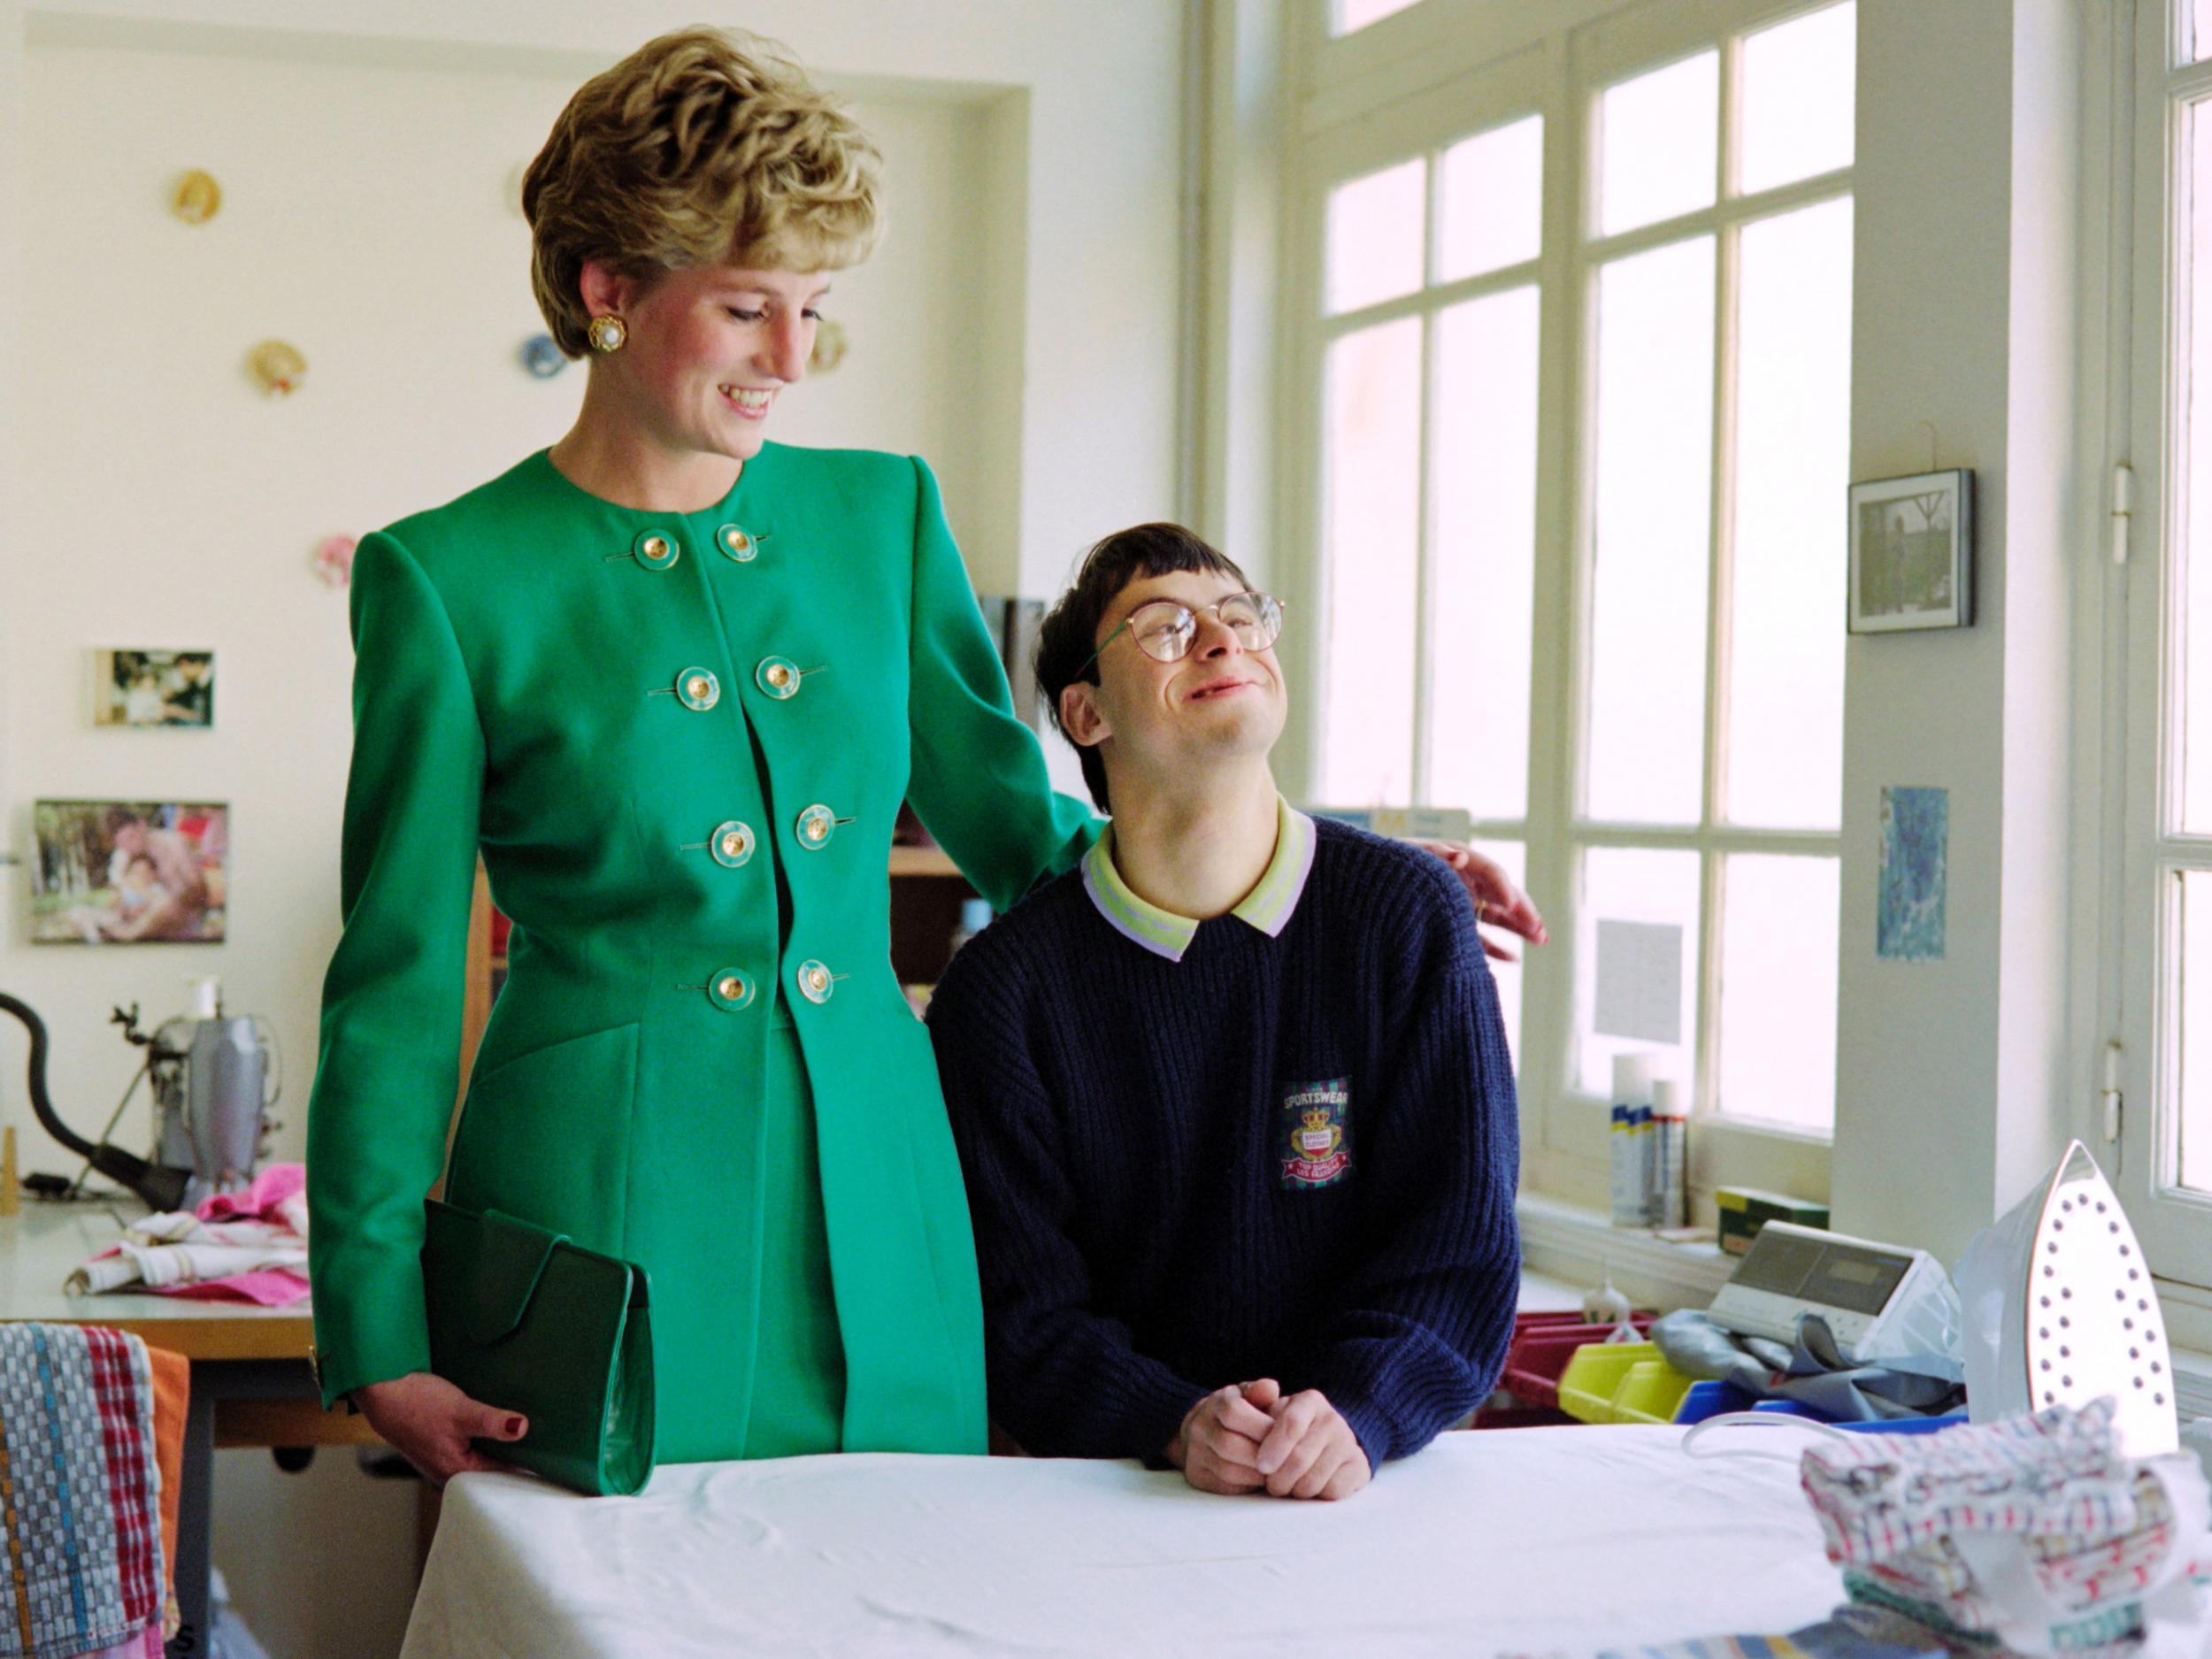 Diana listens to a young disabled boy on 13 November, 1992 during her visit to a home in Paris